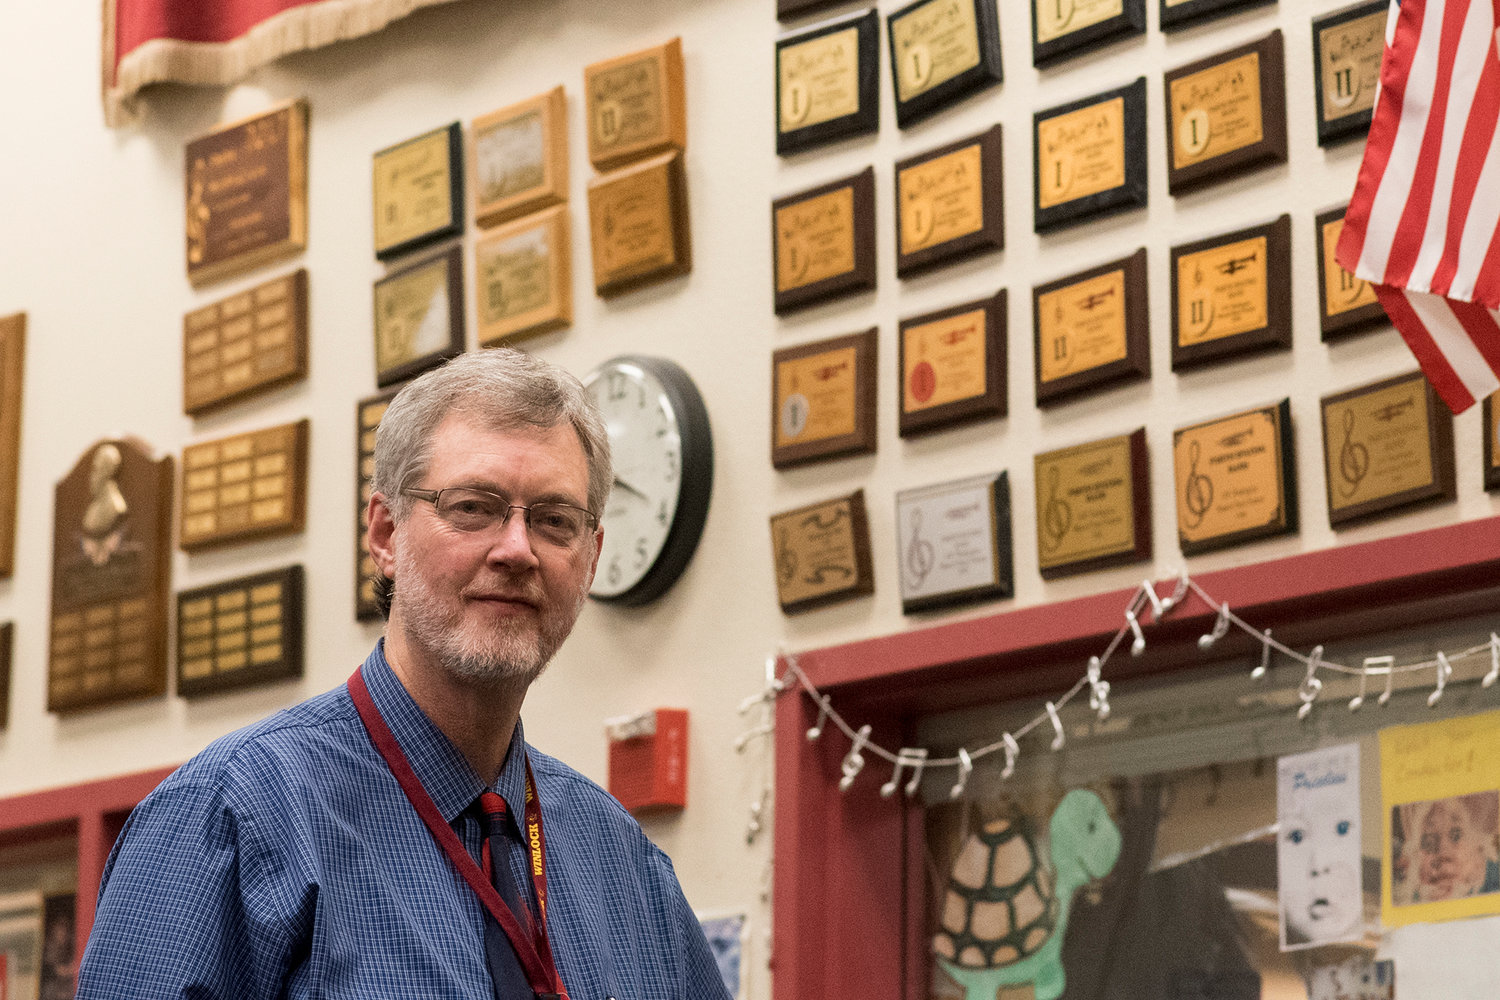 Karl Scarborough, Winlock music teacher, stands in front of his office in the music room in this 2020 Chronicle file photo.